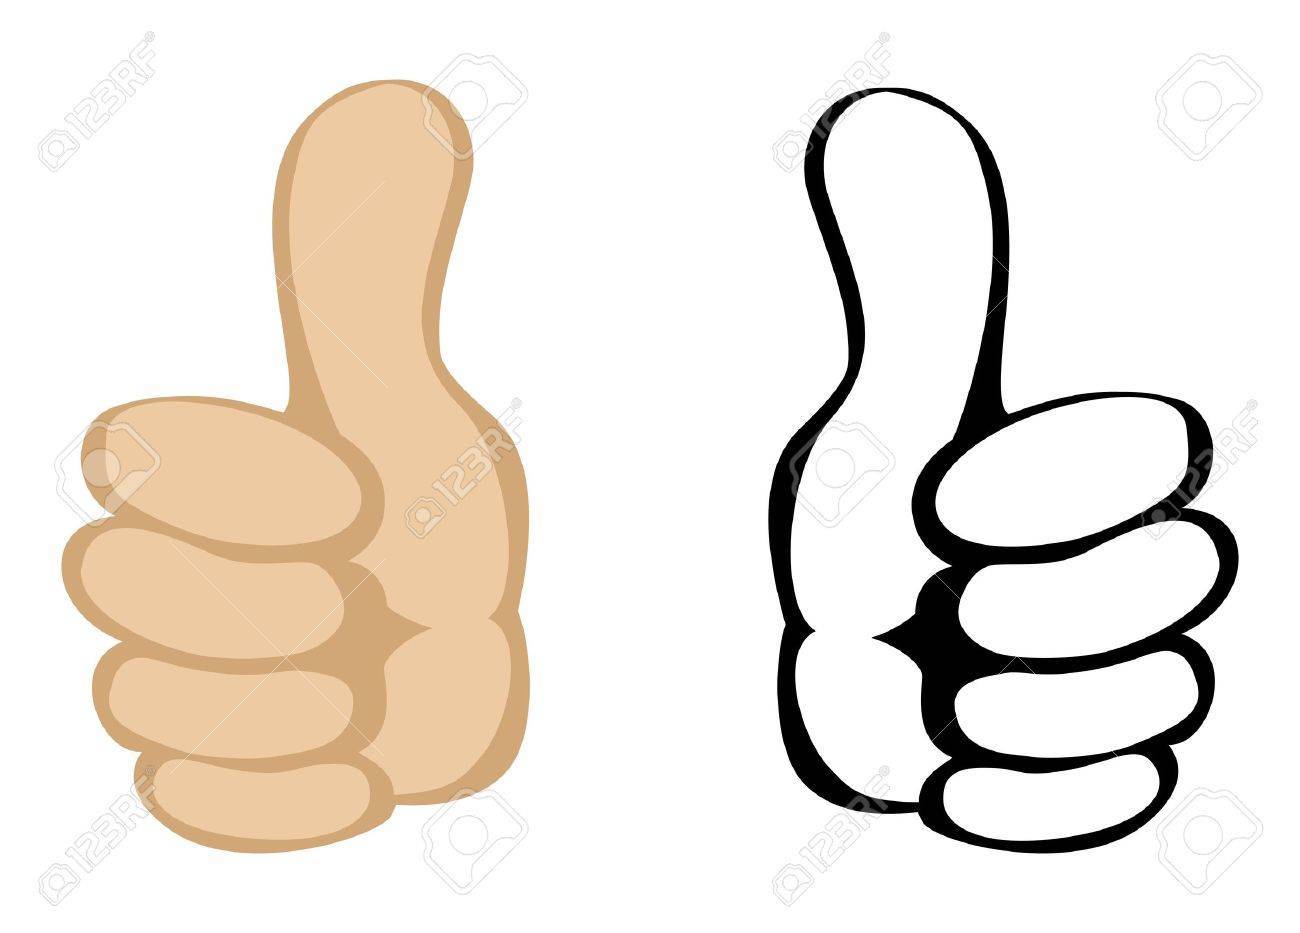 Thumbs hand clipart.